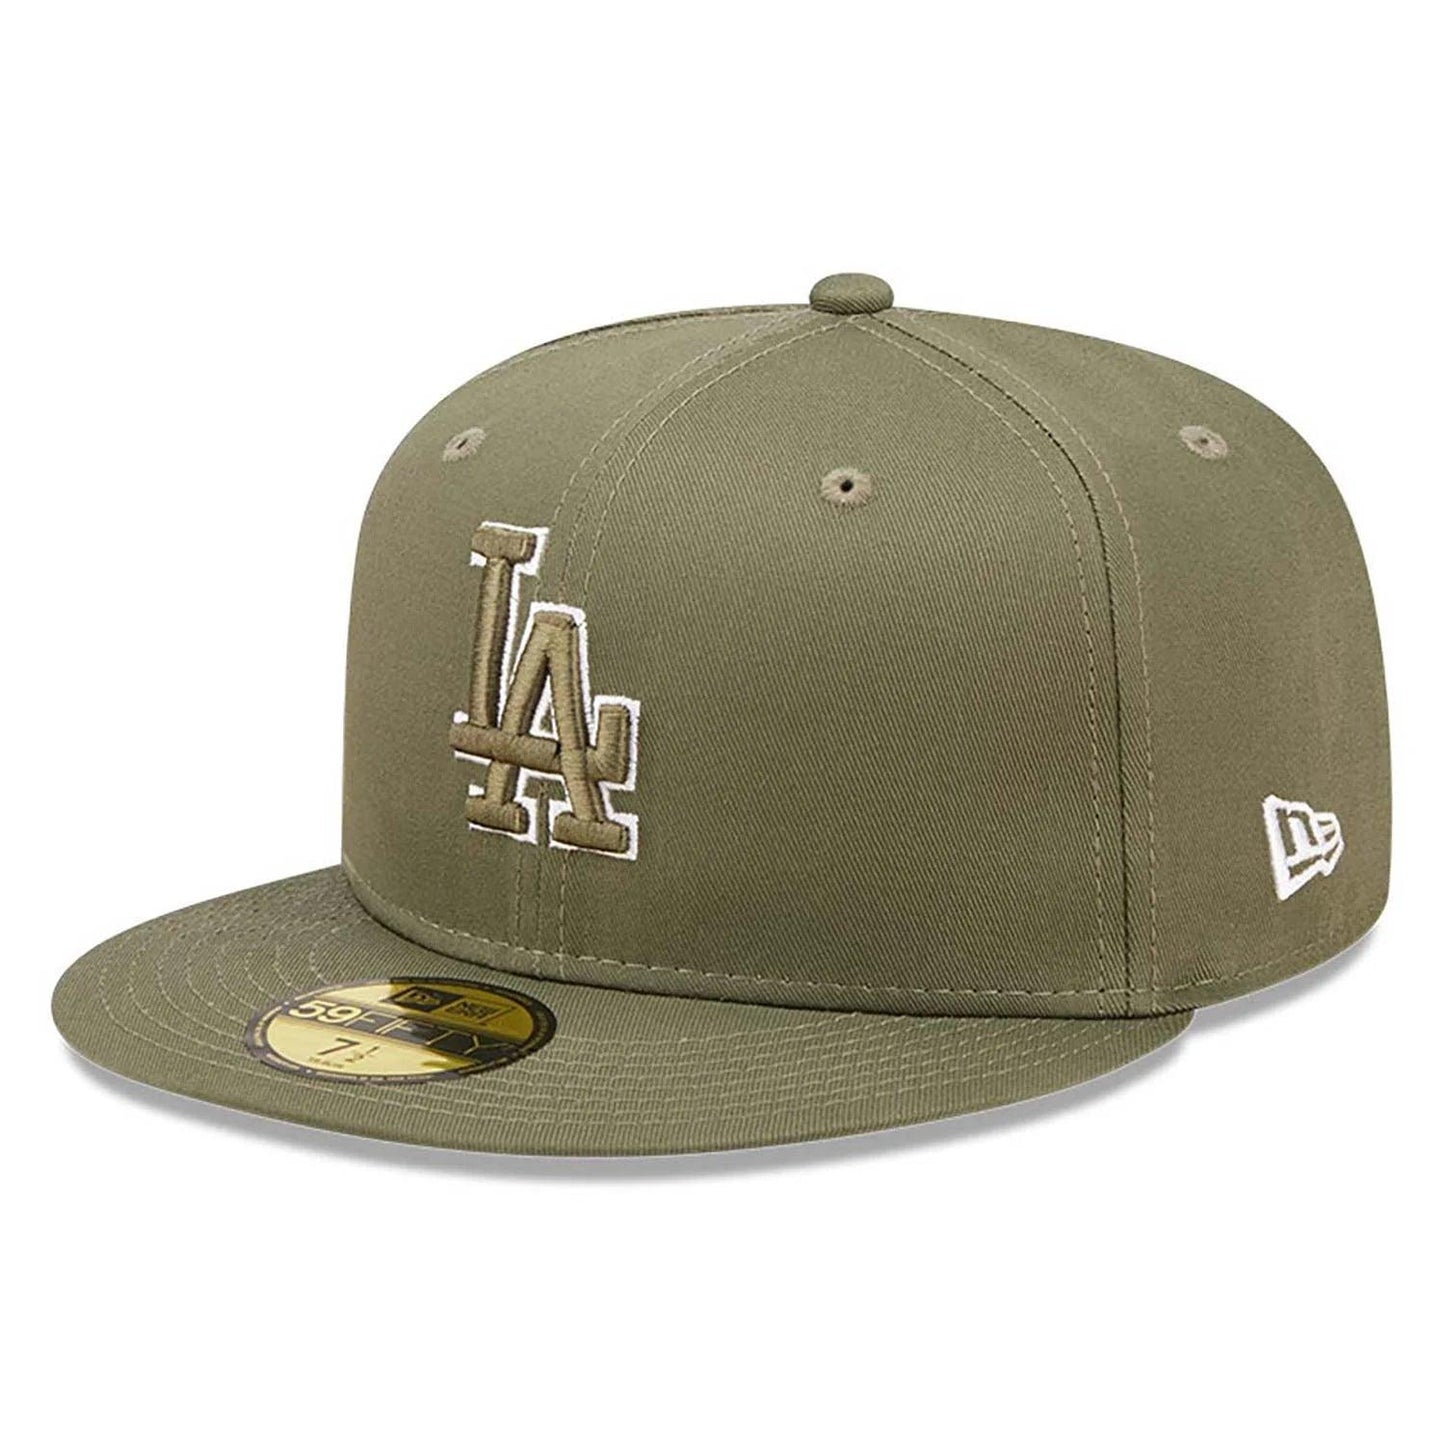 NEW ERA 59FIFTY MLB LOS ANGELES DODGERS TEAM OUTLINE OLIVE / OLIVE UV FITTED CAP